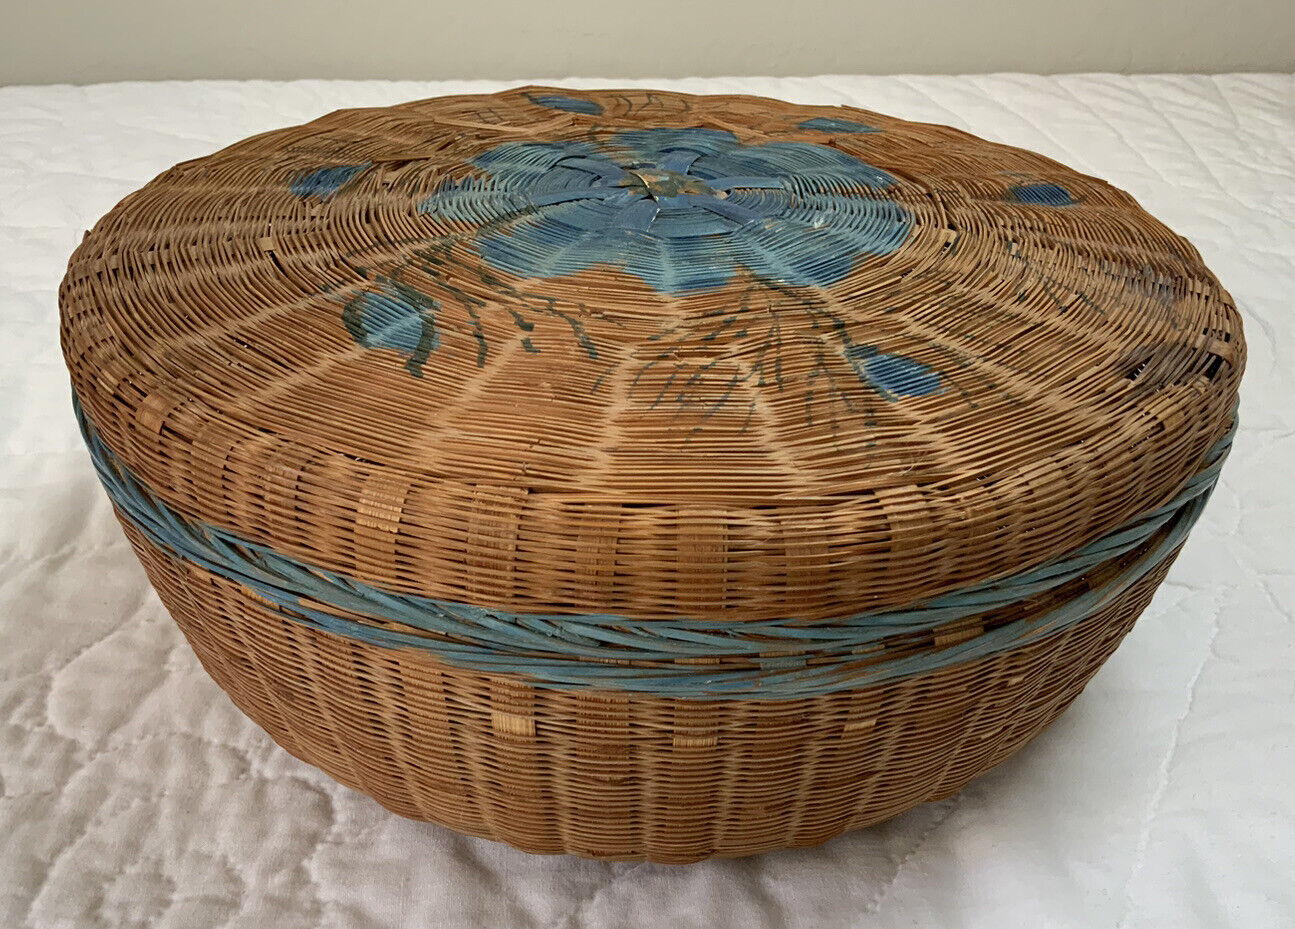 Vintage Woven Sewing Basket, Large, Brown, Blue Painted Flower On Top